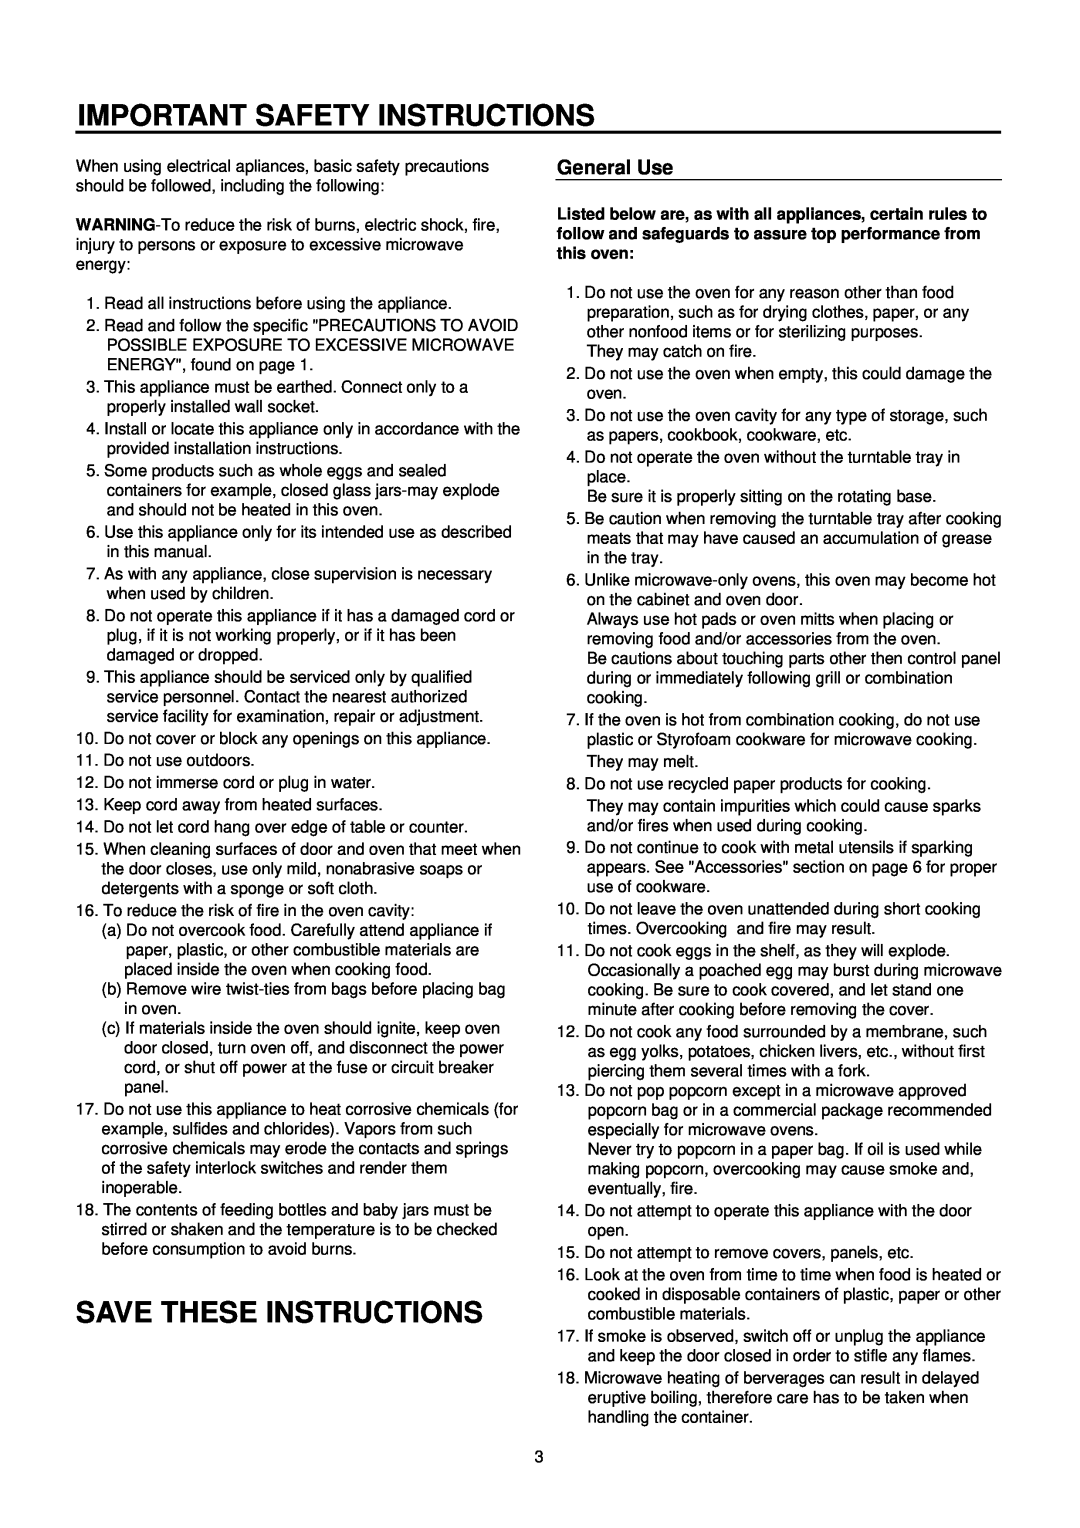 Daewoo KOC-873TSL manual Important Safety Instructions, Save These Instructions, General Use 